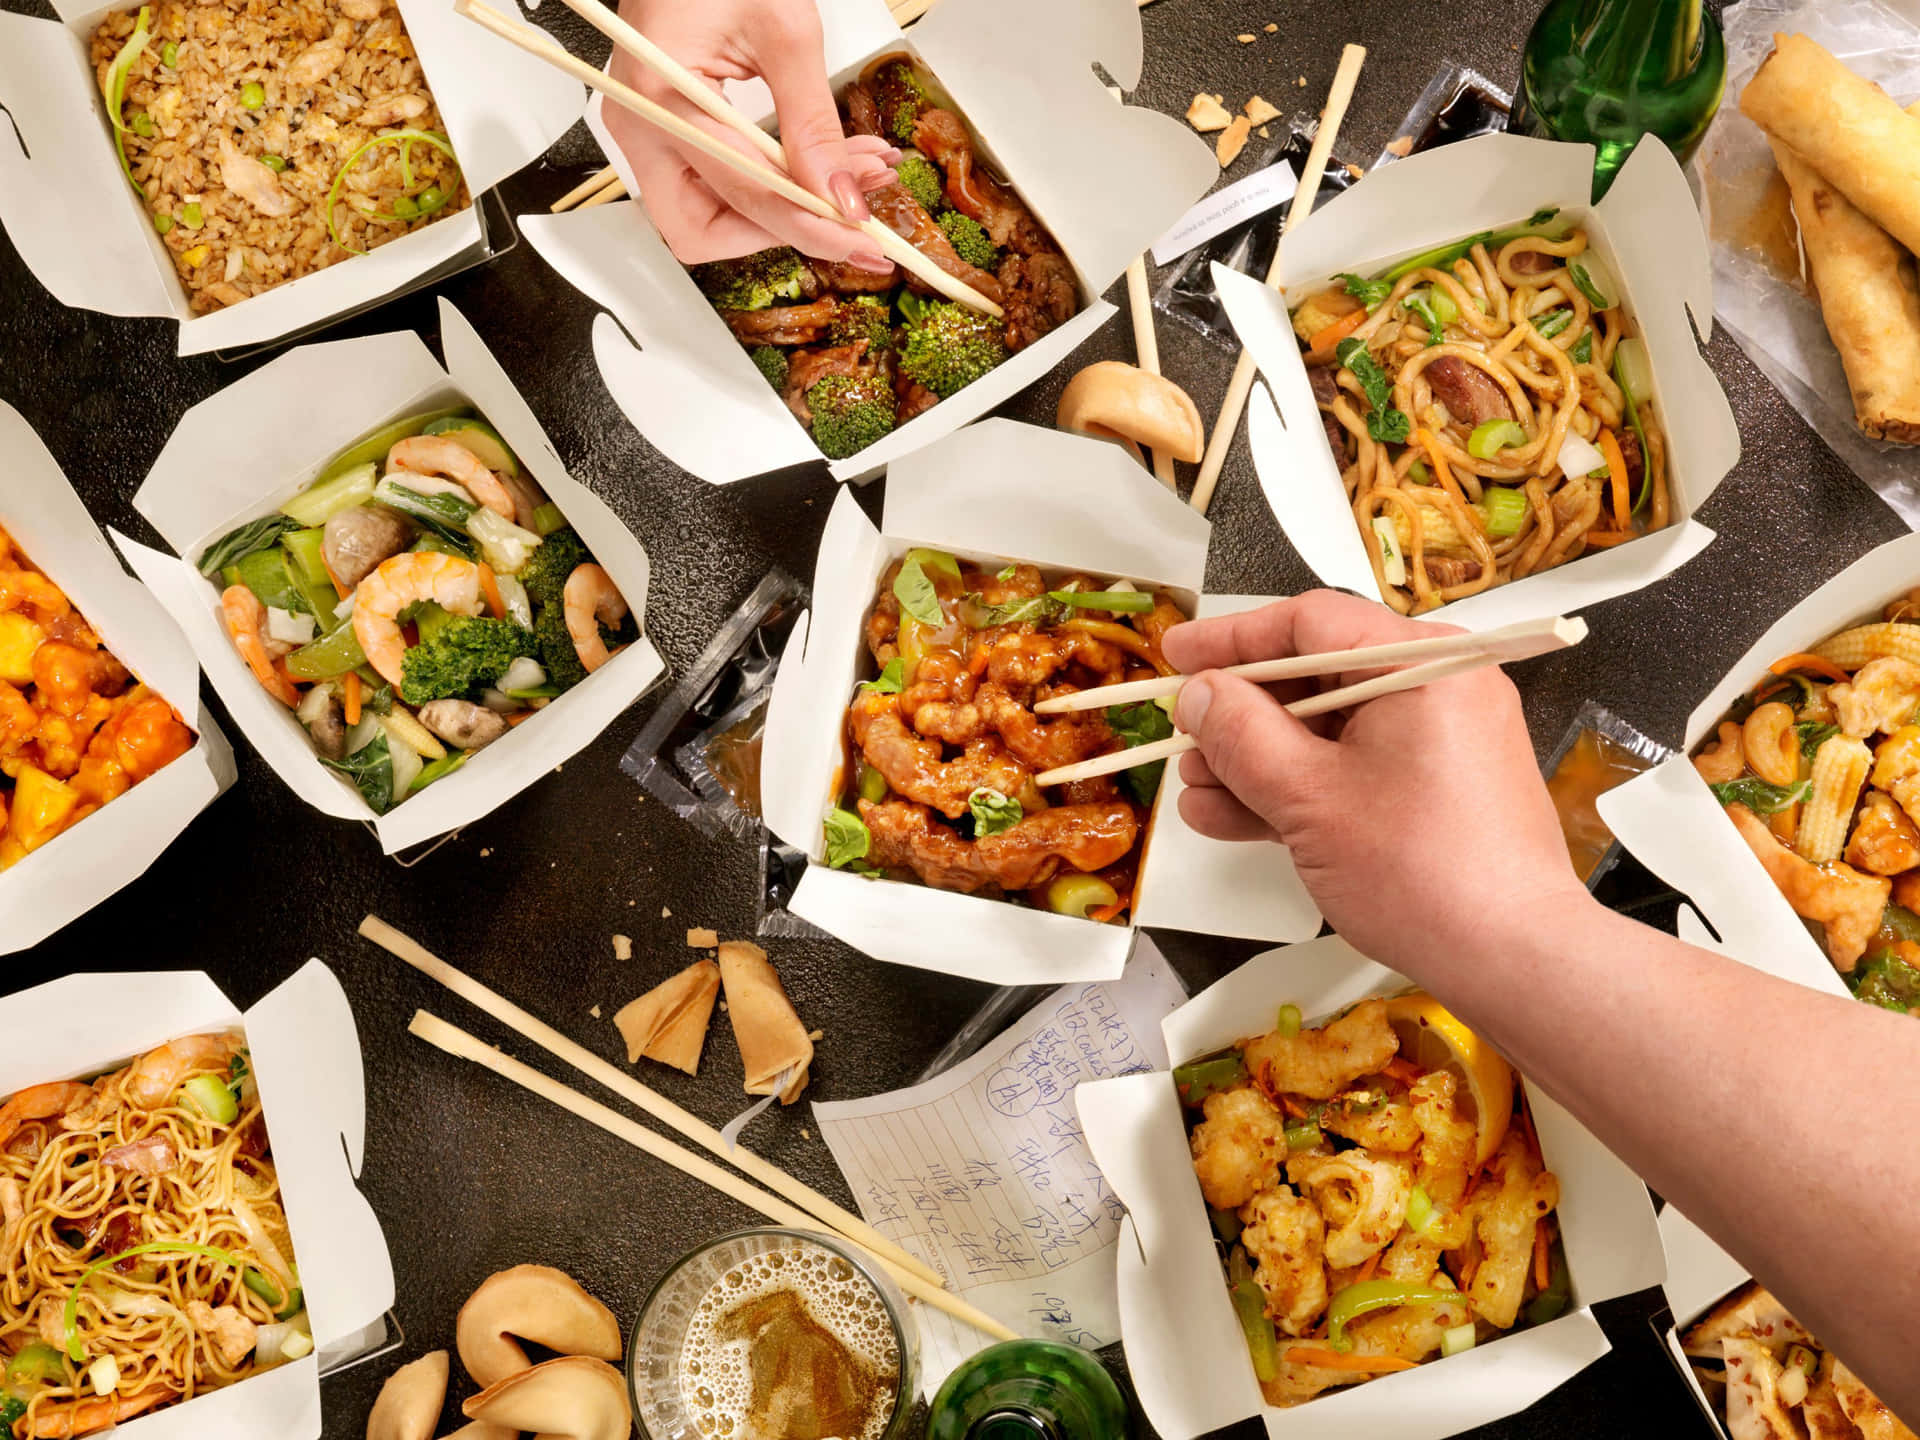 A Group Of People Holding Chopsticks And Eating Asian Food